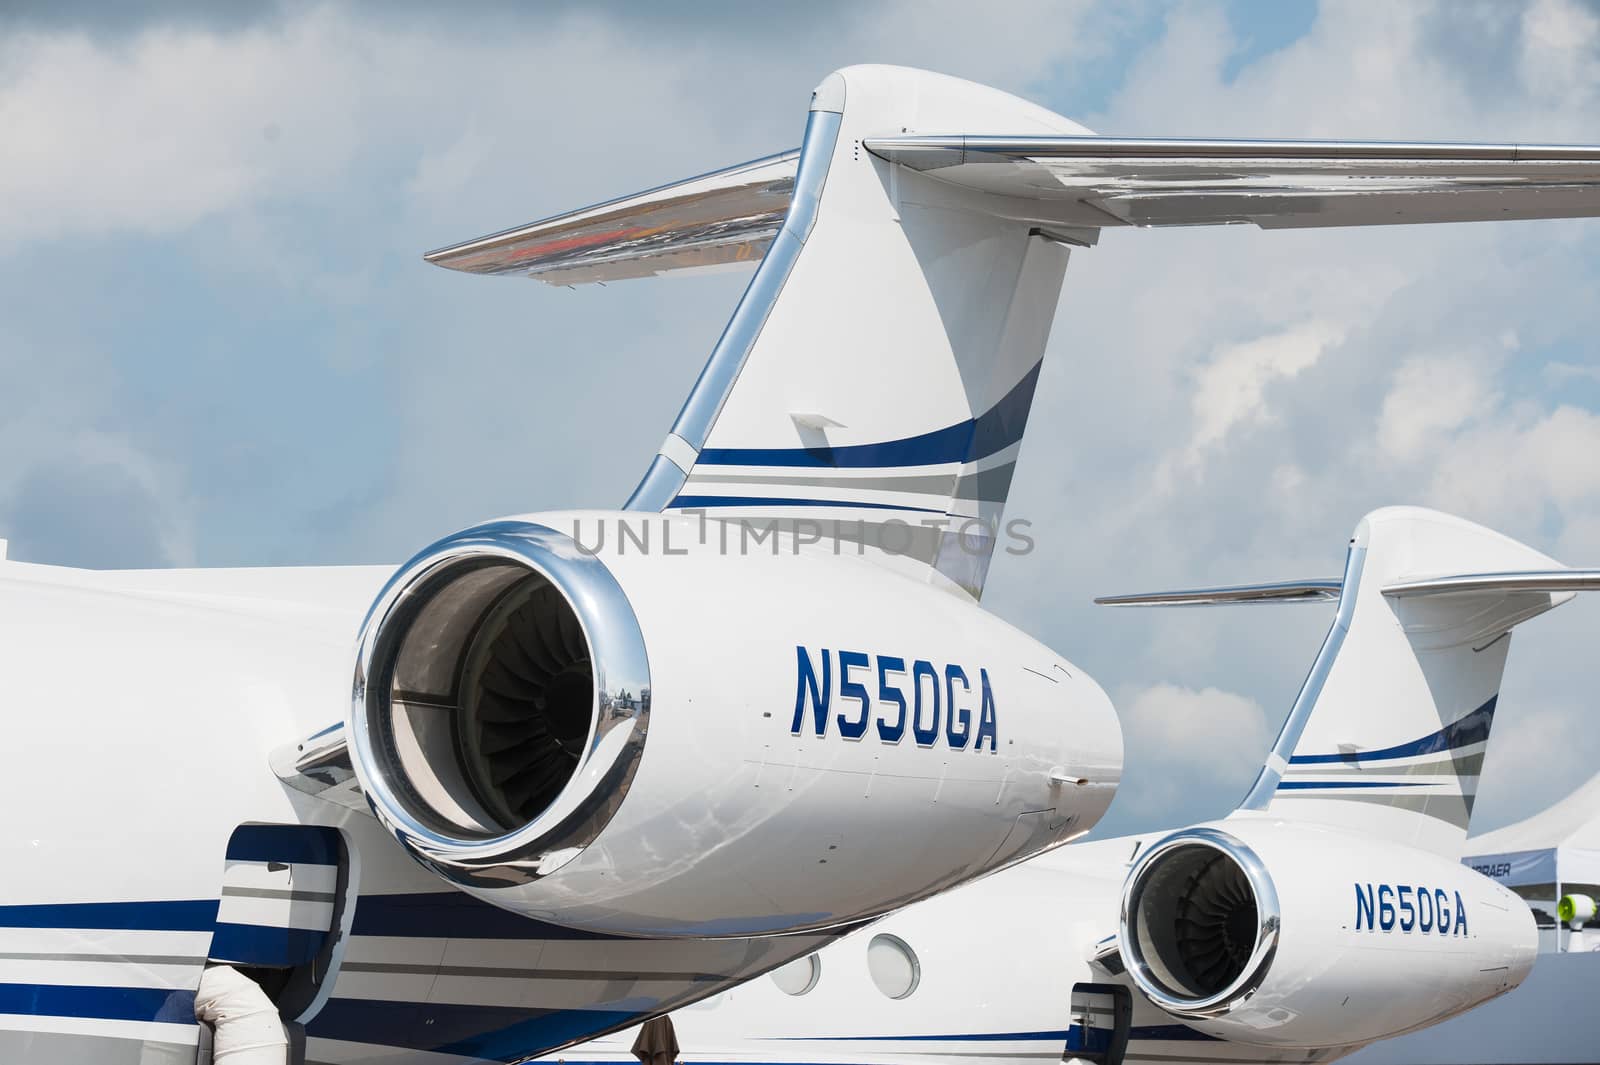 Singapore - February 14, 2016: Engines and tails of Gulfstream G550 and G650 executive jets on display during Singapore Airshow at Changi Exhibition Centre in Singapore.